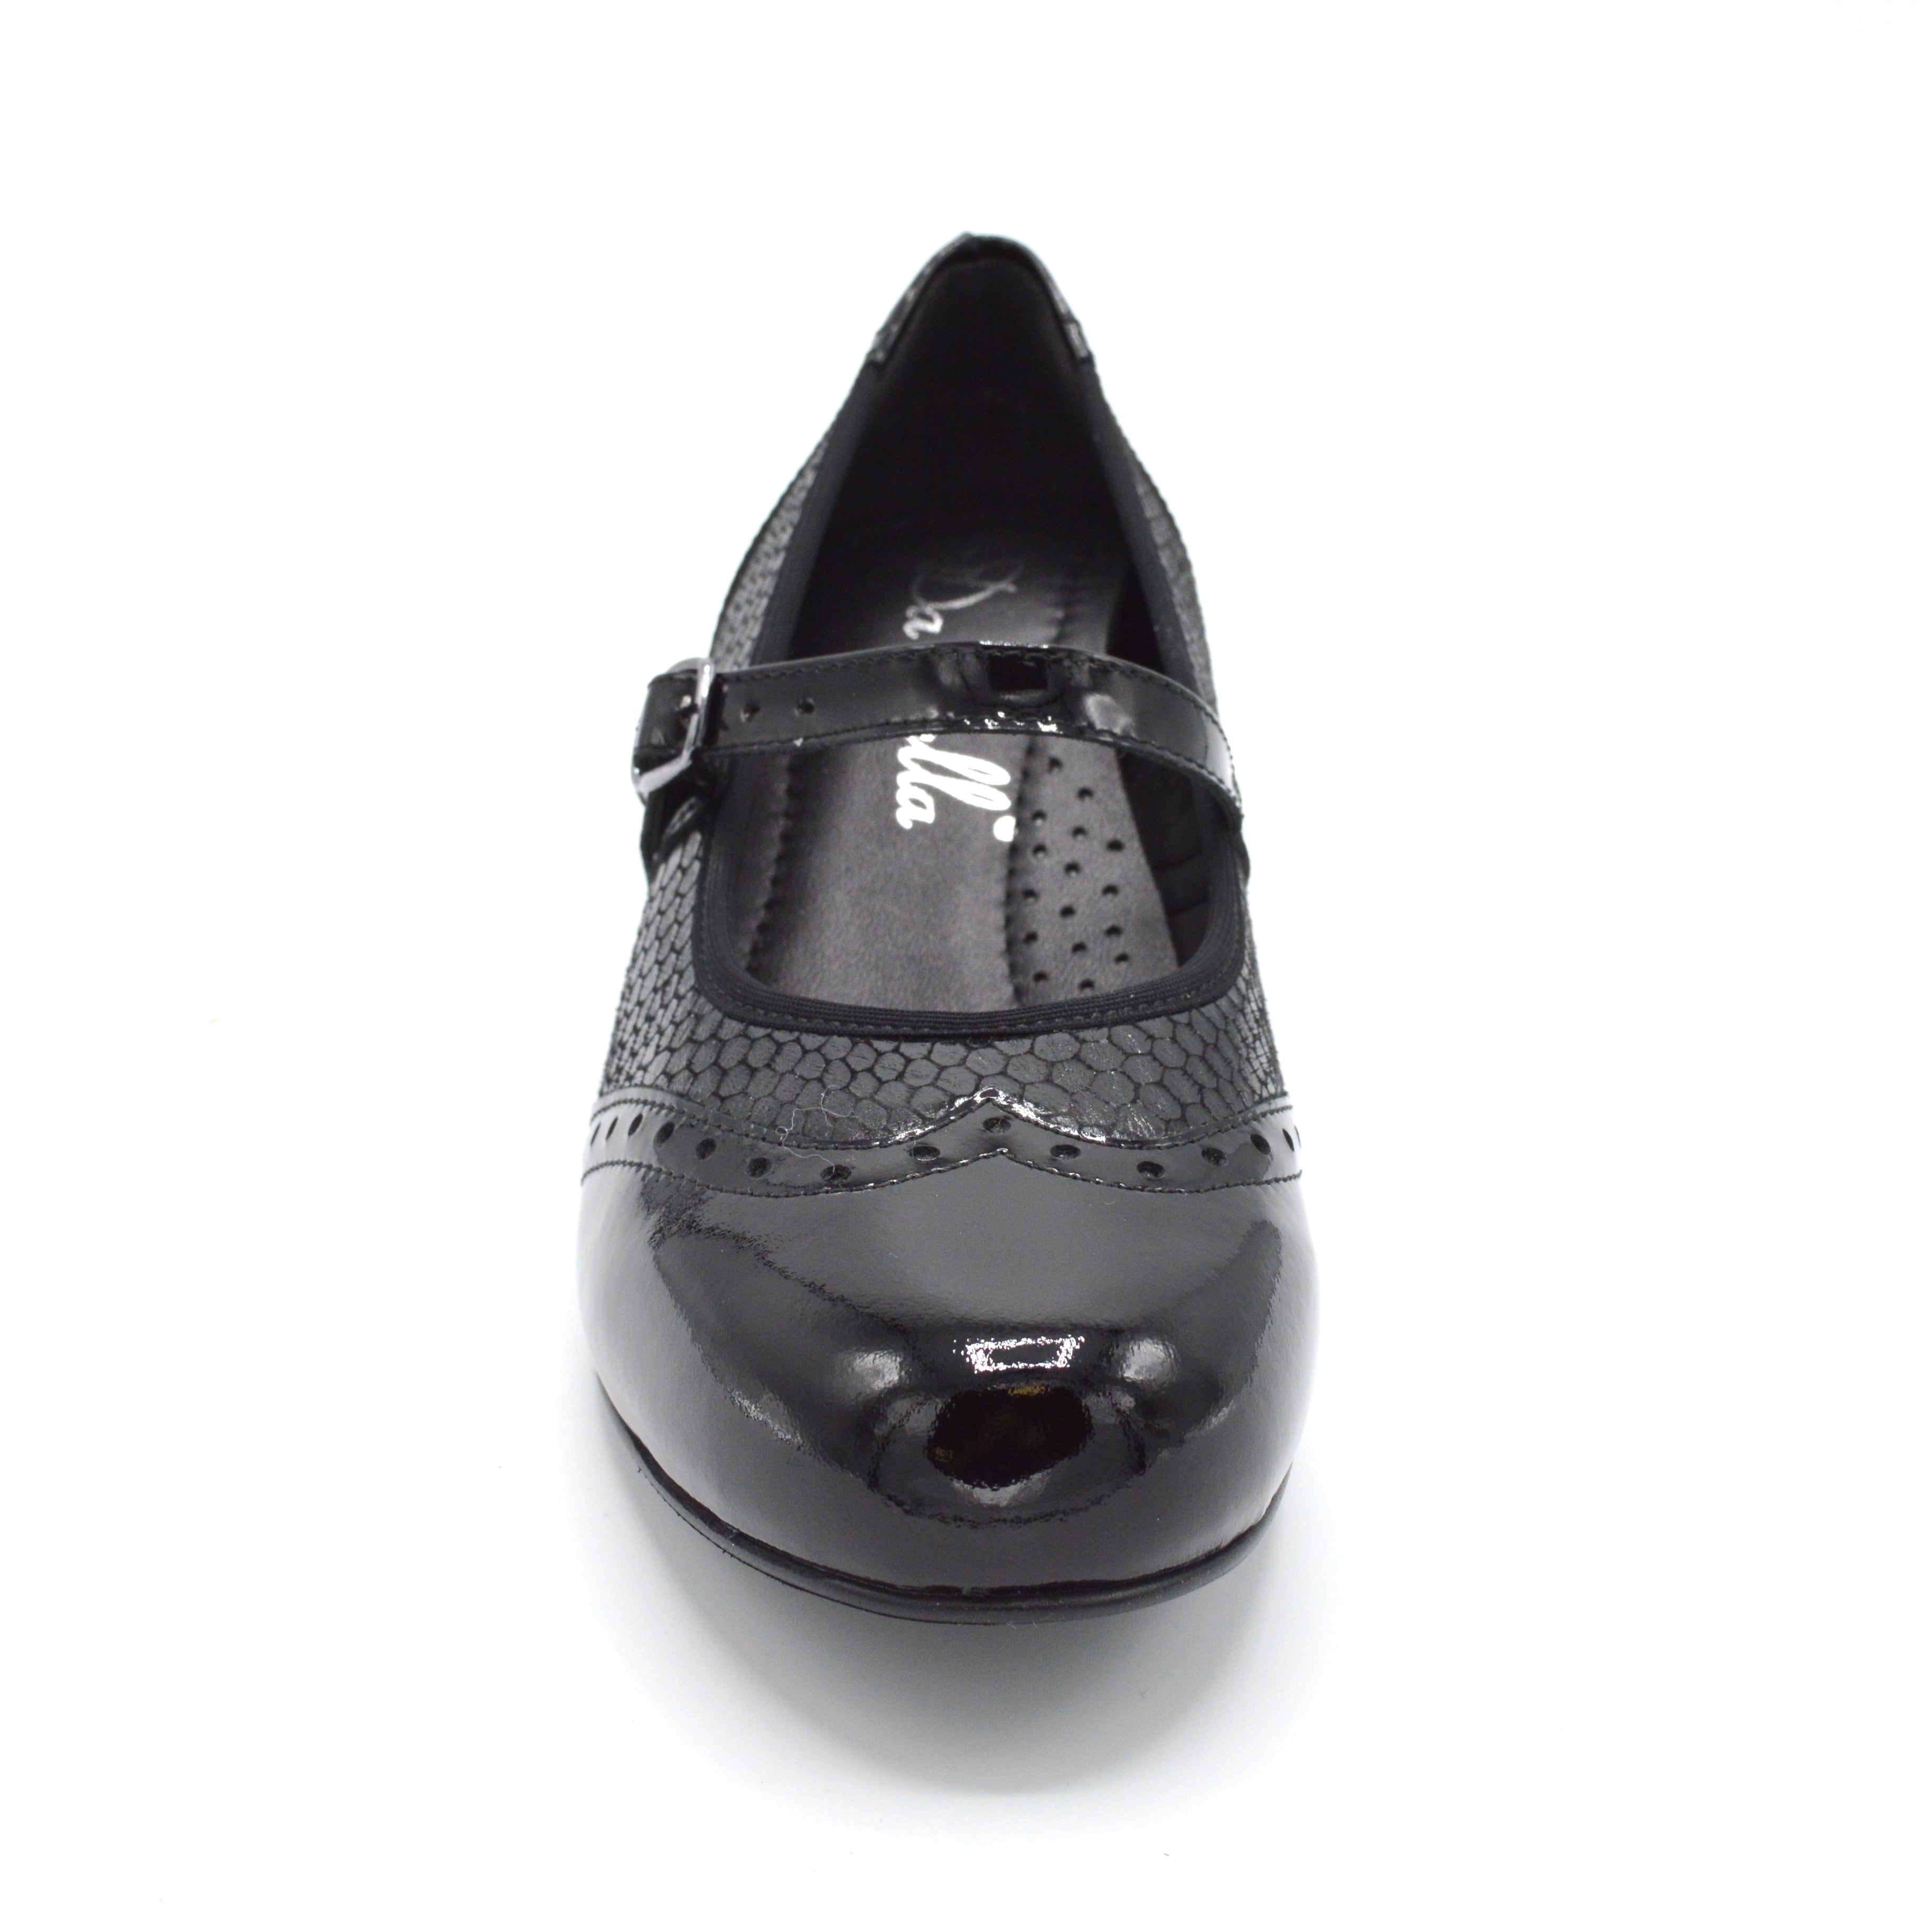 Black Womens Wide Court Shoes For Bunions